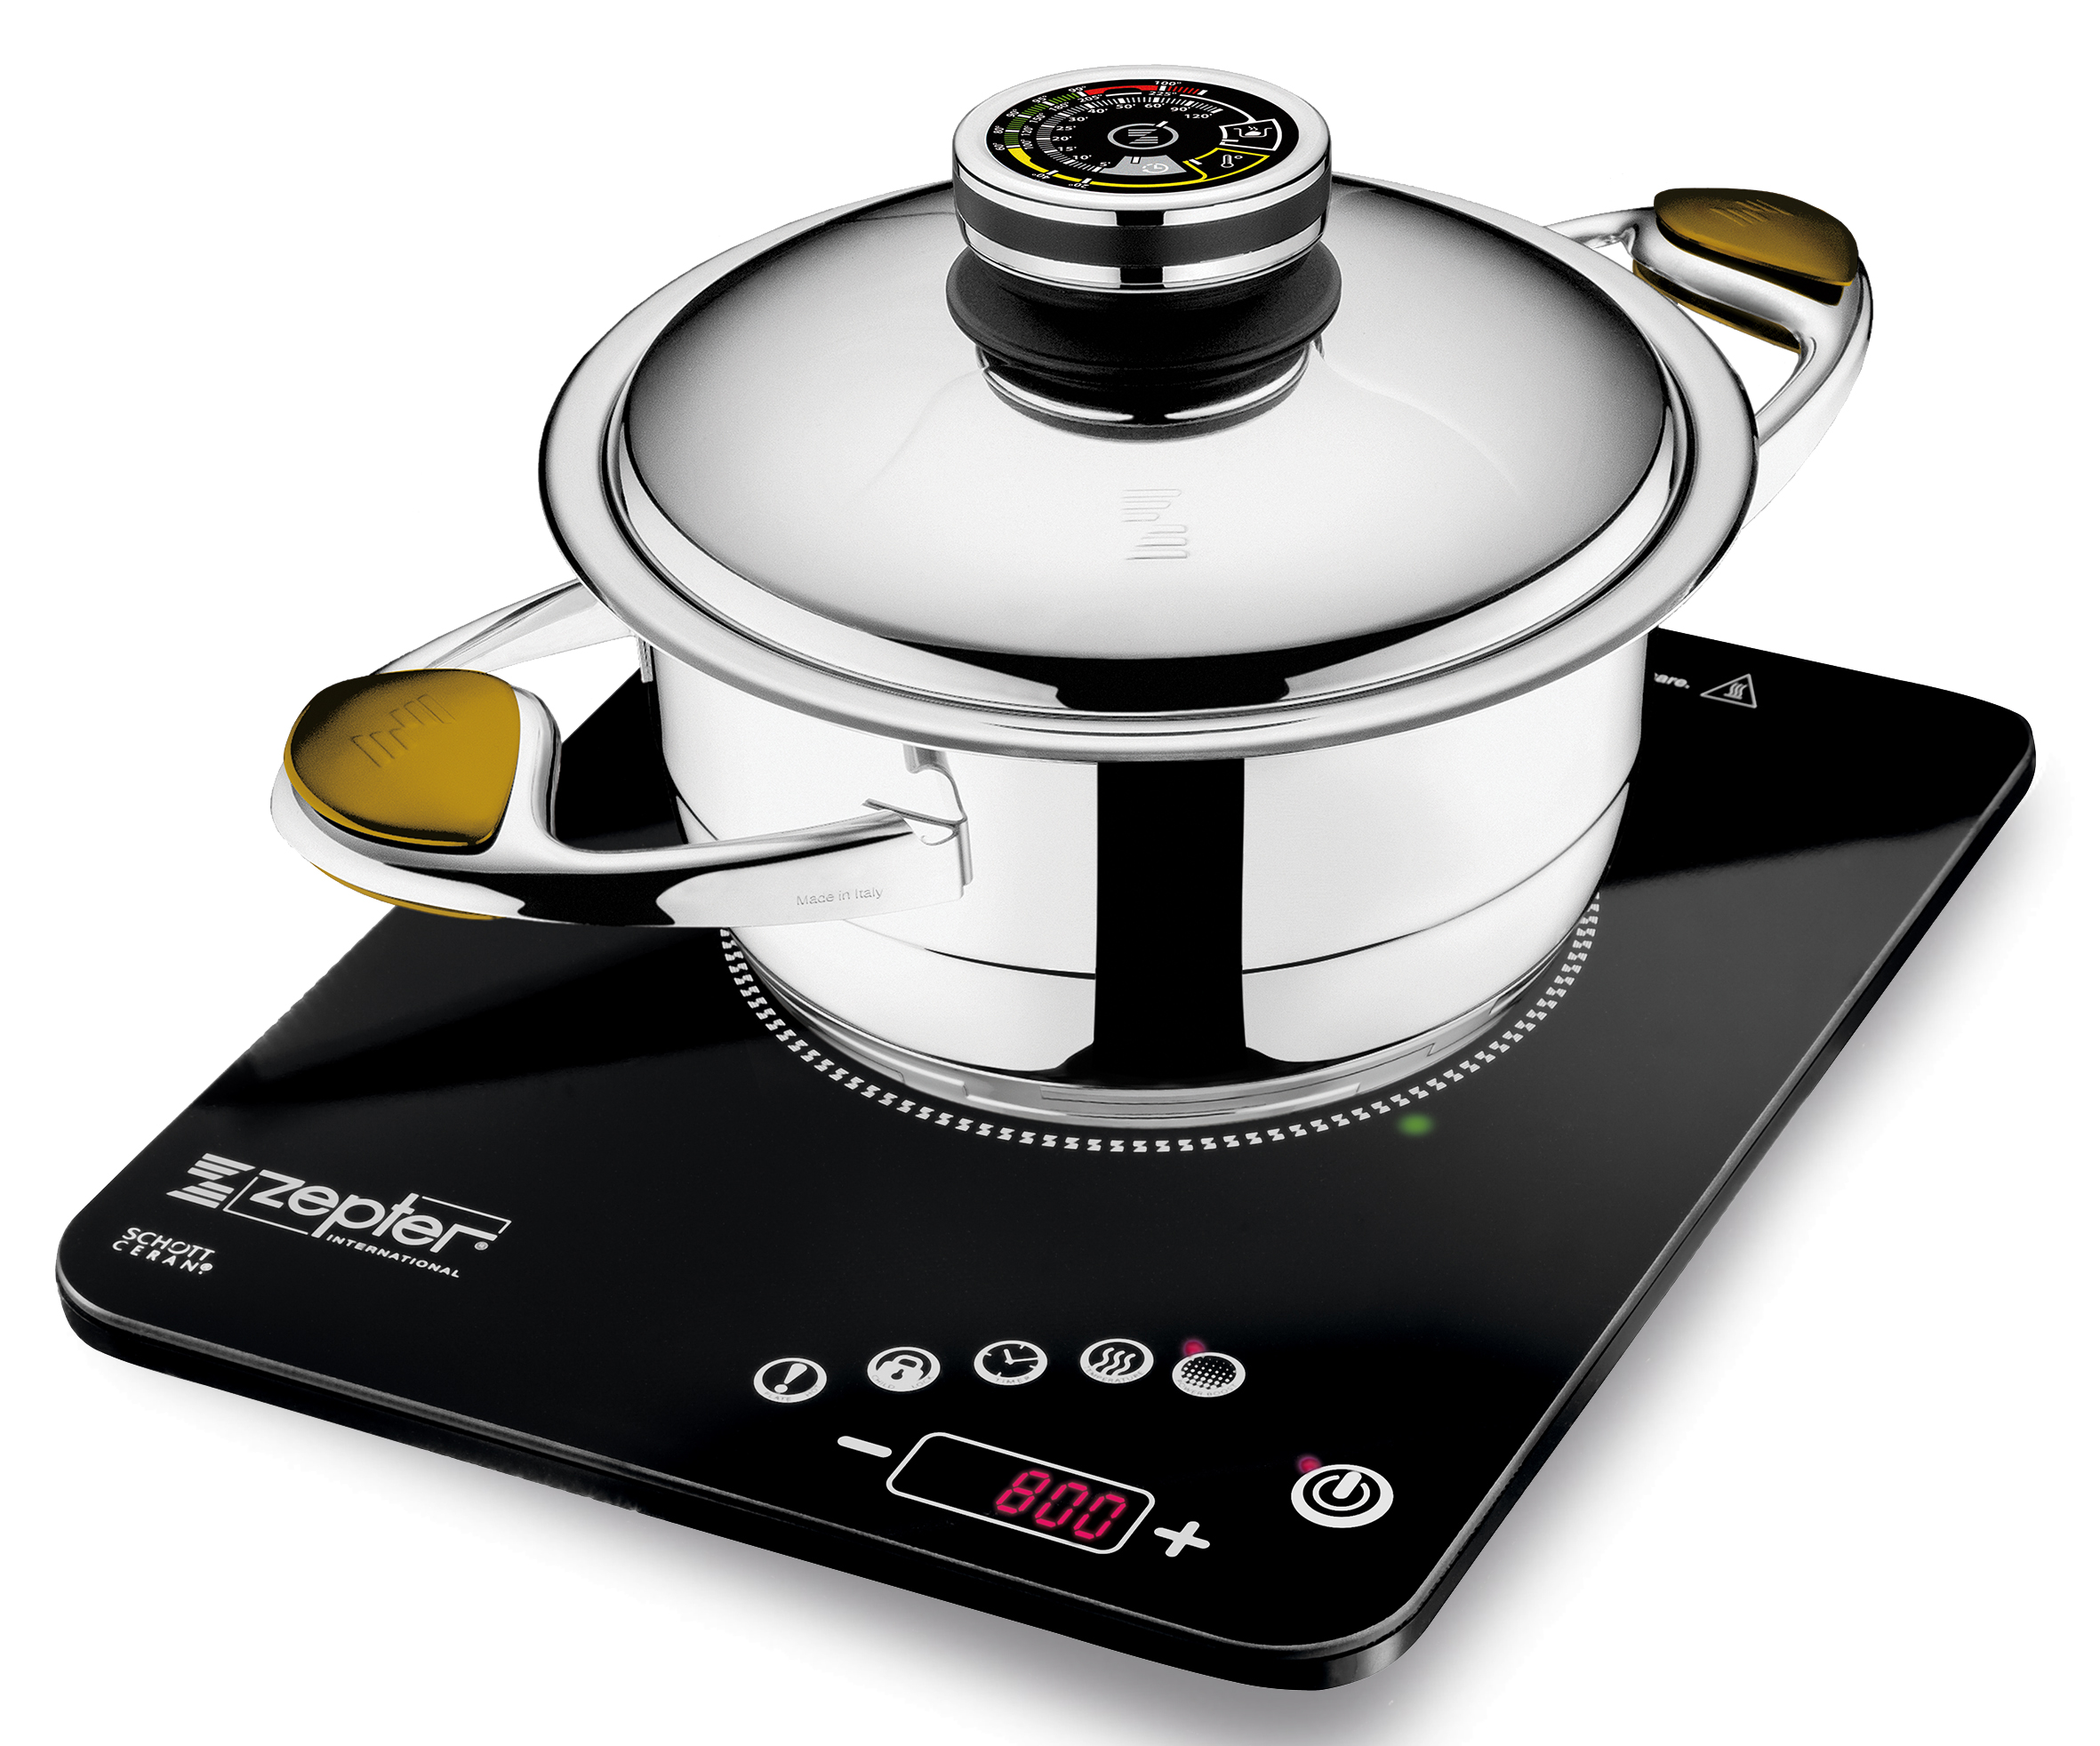 All Zepter Masterpiece Cookware pots have the patented accuthermal bottom which work perfectly with the new Radio Induction Cooker